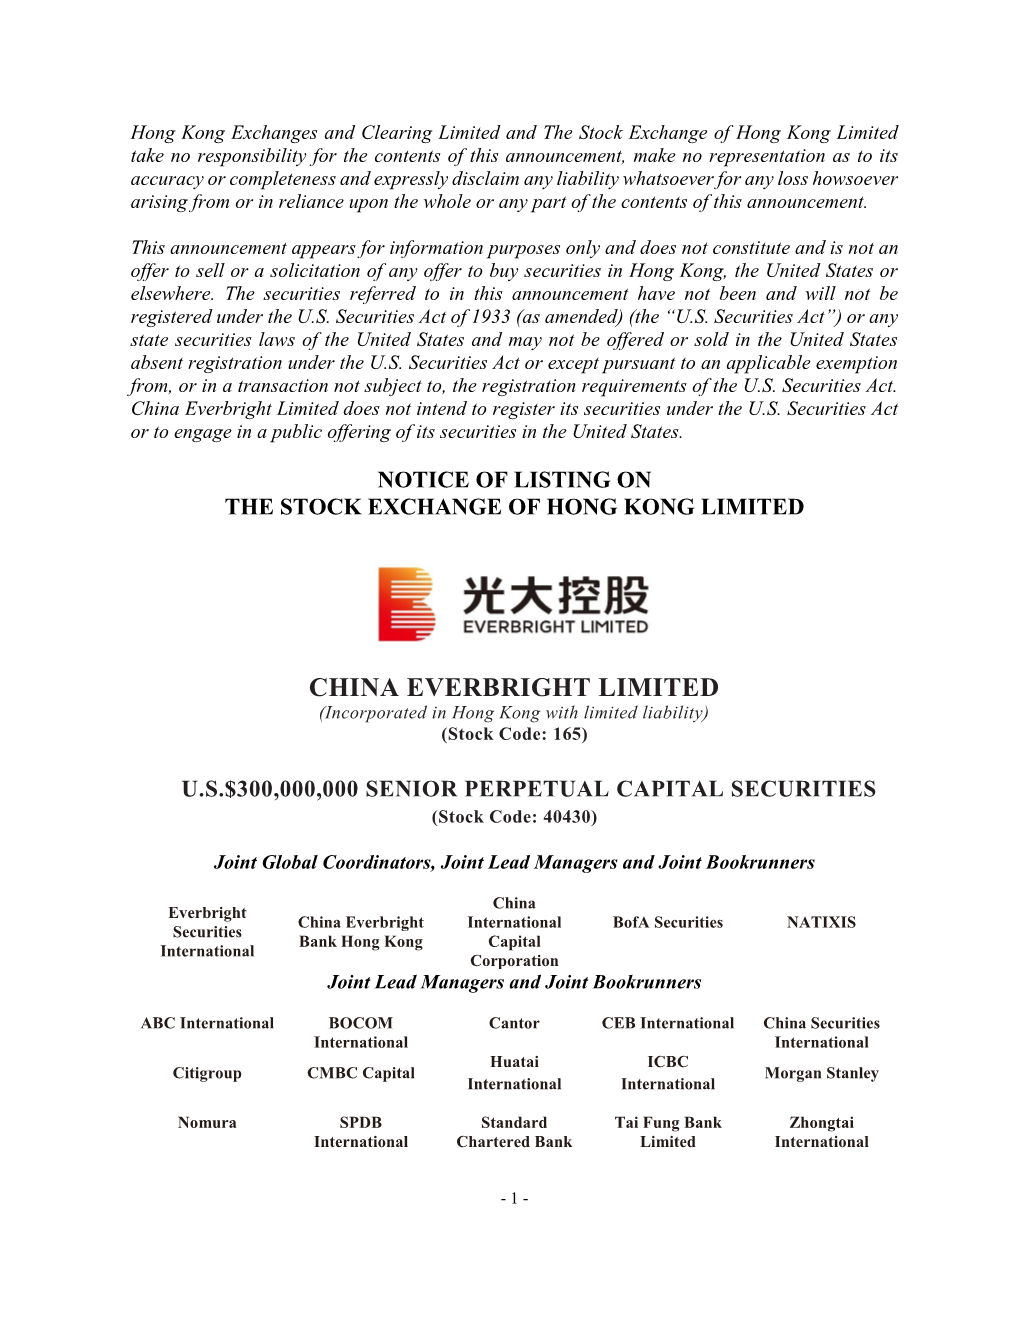 China Everbright Limited Does Not Intend to Register Its Securities Under the U.S